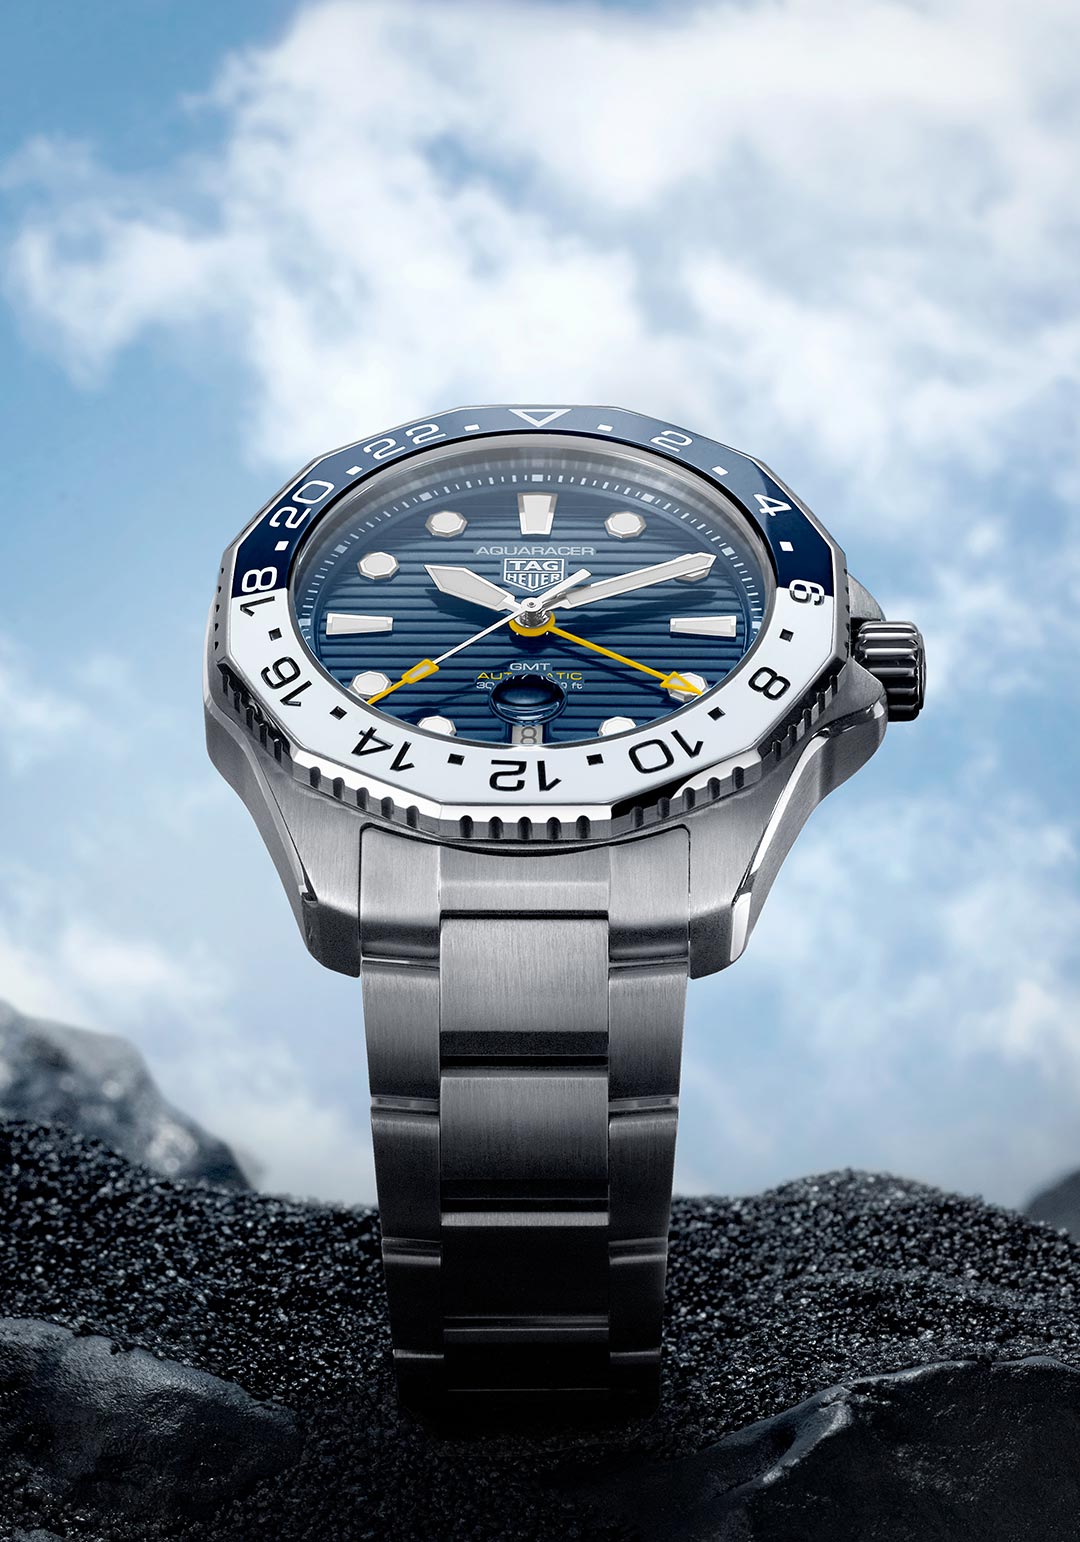 Introduction on the Aquaracer Professional 300 GMT 